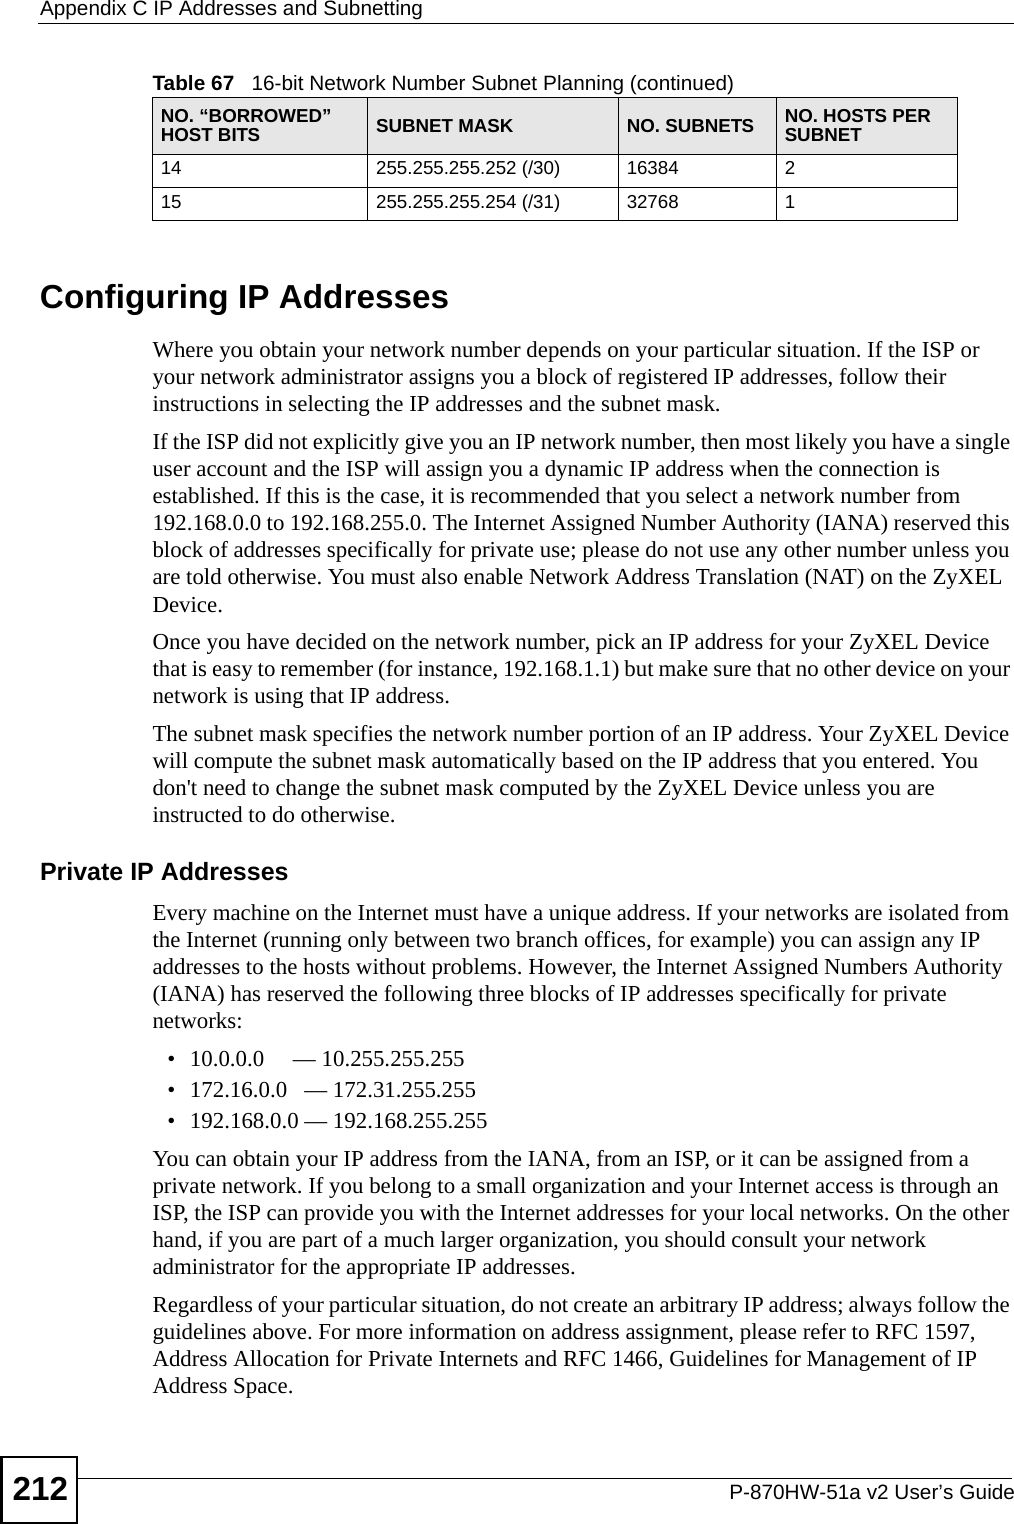 Appendix C IP Addresses and SubnettingP-870HW-51a v2 User’s Guide212Configuring IP AddressesWhere you obtain your network number depends on your particular situation. If the ISP or your network administrator assigns you a block of registered IP addresses, follow their instructions in selecting the IP addresses and the subnet mask.If the ISP did not explicitly give you an IP network number, then most likely you have a single user account and the ISP will assign you a dynamic IP address when the connection is established. If this is the case, it is recommended that you select a network number from 192.168.0.0 to 192.168.255.0. The Internet Assigned Number Authority (IANA) reserved this block of addresses specifically for private use; please do not use any other number unless you are told otherwise. You must also enable Network Address Translation (NAT) on the ZyXEL Device. Once you have decided on the network number, pick an IP address for your ZyXEL Device that is easy to remember (for instance, 192.168.1.1) but make sure that no other device on your network is using that IP address.The subnet mask specifies the network number portion of an IP address. Your ZyXEL Device will compute the subnet mask automatically based on the IP address that you entered. You don&apos;t need to change the subnet mask computed by the ZyXEL Device unless you are instructed to do otherwise.Private IP AddressesEvery machine on the Internet must have a unique address. If your networks are isolated from the Internet (running only between two branch offices, for example) you can assign any IP addresses to the hosts without problems. However, the Internet Assigned Numbers Authority (IANA) has reserved the following three blocks of IP addresses specifically for private networks:• 10.0.0.0     — 10.255.255.255• 172.16.0.0   — 172.31.255.255• 192.168.0.0 — 192.168.255.255You can obtain your IP address from the IANA, from an ISP, or it can be assigned from a private network. If you belong to a small organization and your Internet access is through an ISP, the ISP can provide you with the Internet addresses for your local networks. On the other hand, if you are part of a much larger organization, you should consult your network administrator for the appropriate IP addresses.Regardless of your particular situation, do not create an arbitrary IP address; always follow the guidelines above. For more information on address assignment, please refer to RFC 1597, Address Allocation for Private Internets and RFC 1466, Guidelines for Management of IP Address Space.14 255.255.255.252 (/30) 16384 215 255.255.255.254 (/31) 32768 1Table 67   16-bit Network Number Subnet Planning (continued)NO. “BORROWED” HOST BITS SUBNET MASK NO. SUBNETS NO. HOSTS PER SUBNET